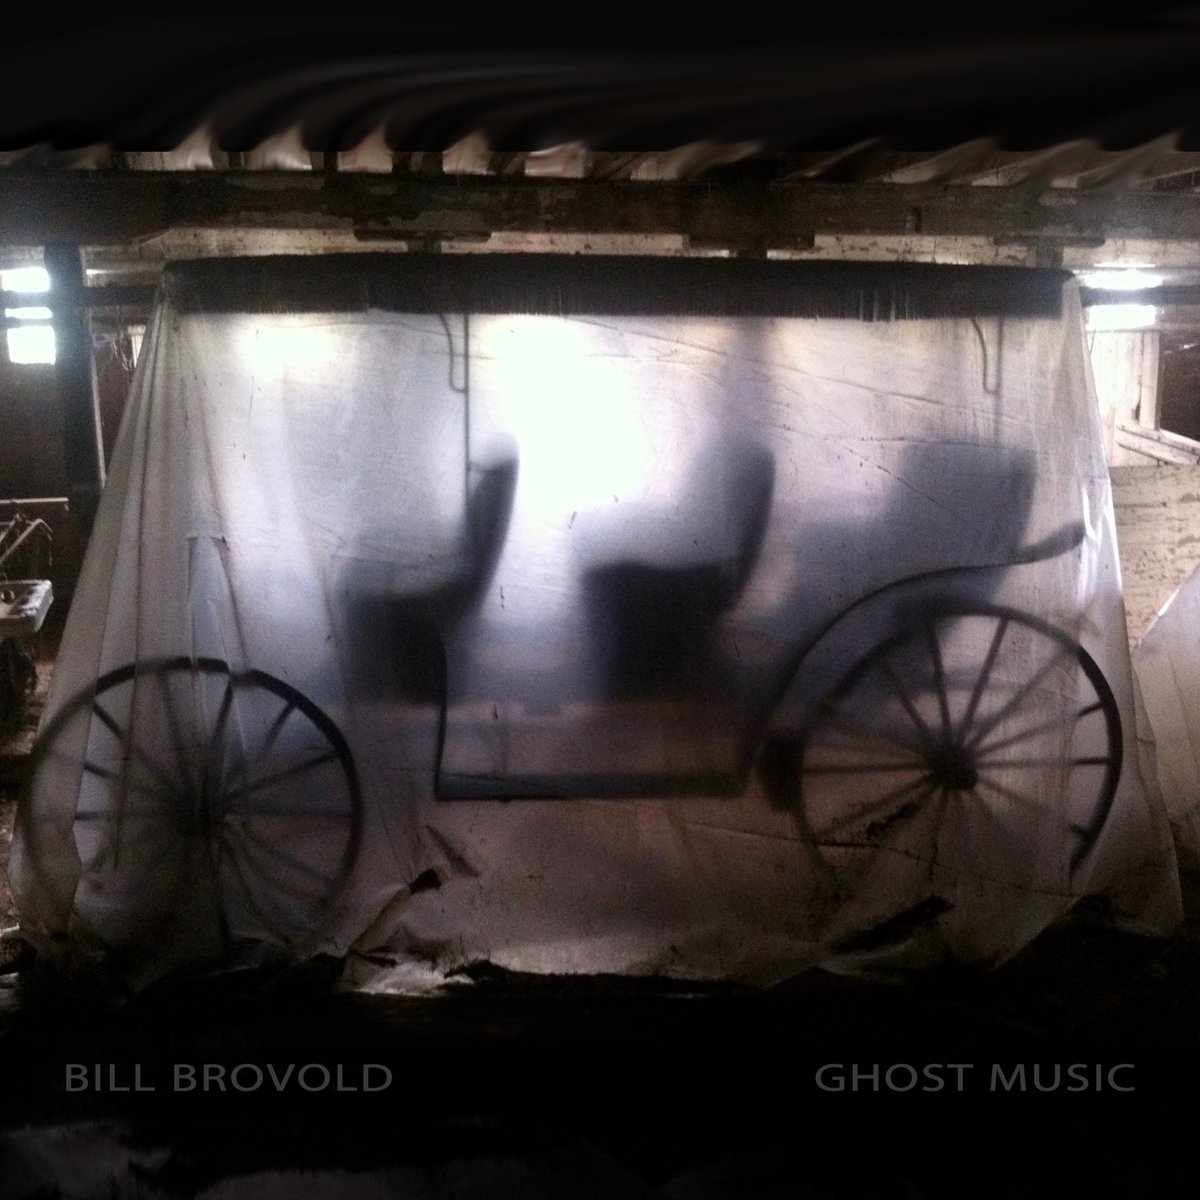 New music from Philip Goth (has words) and Bill Brovold (does not) teamloverecords.bandcamp.com